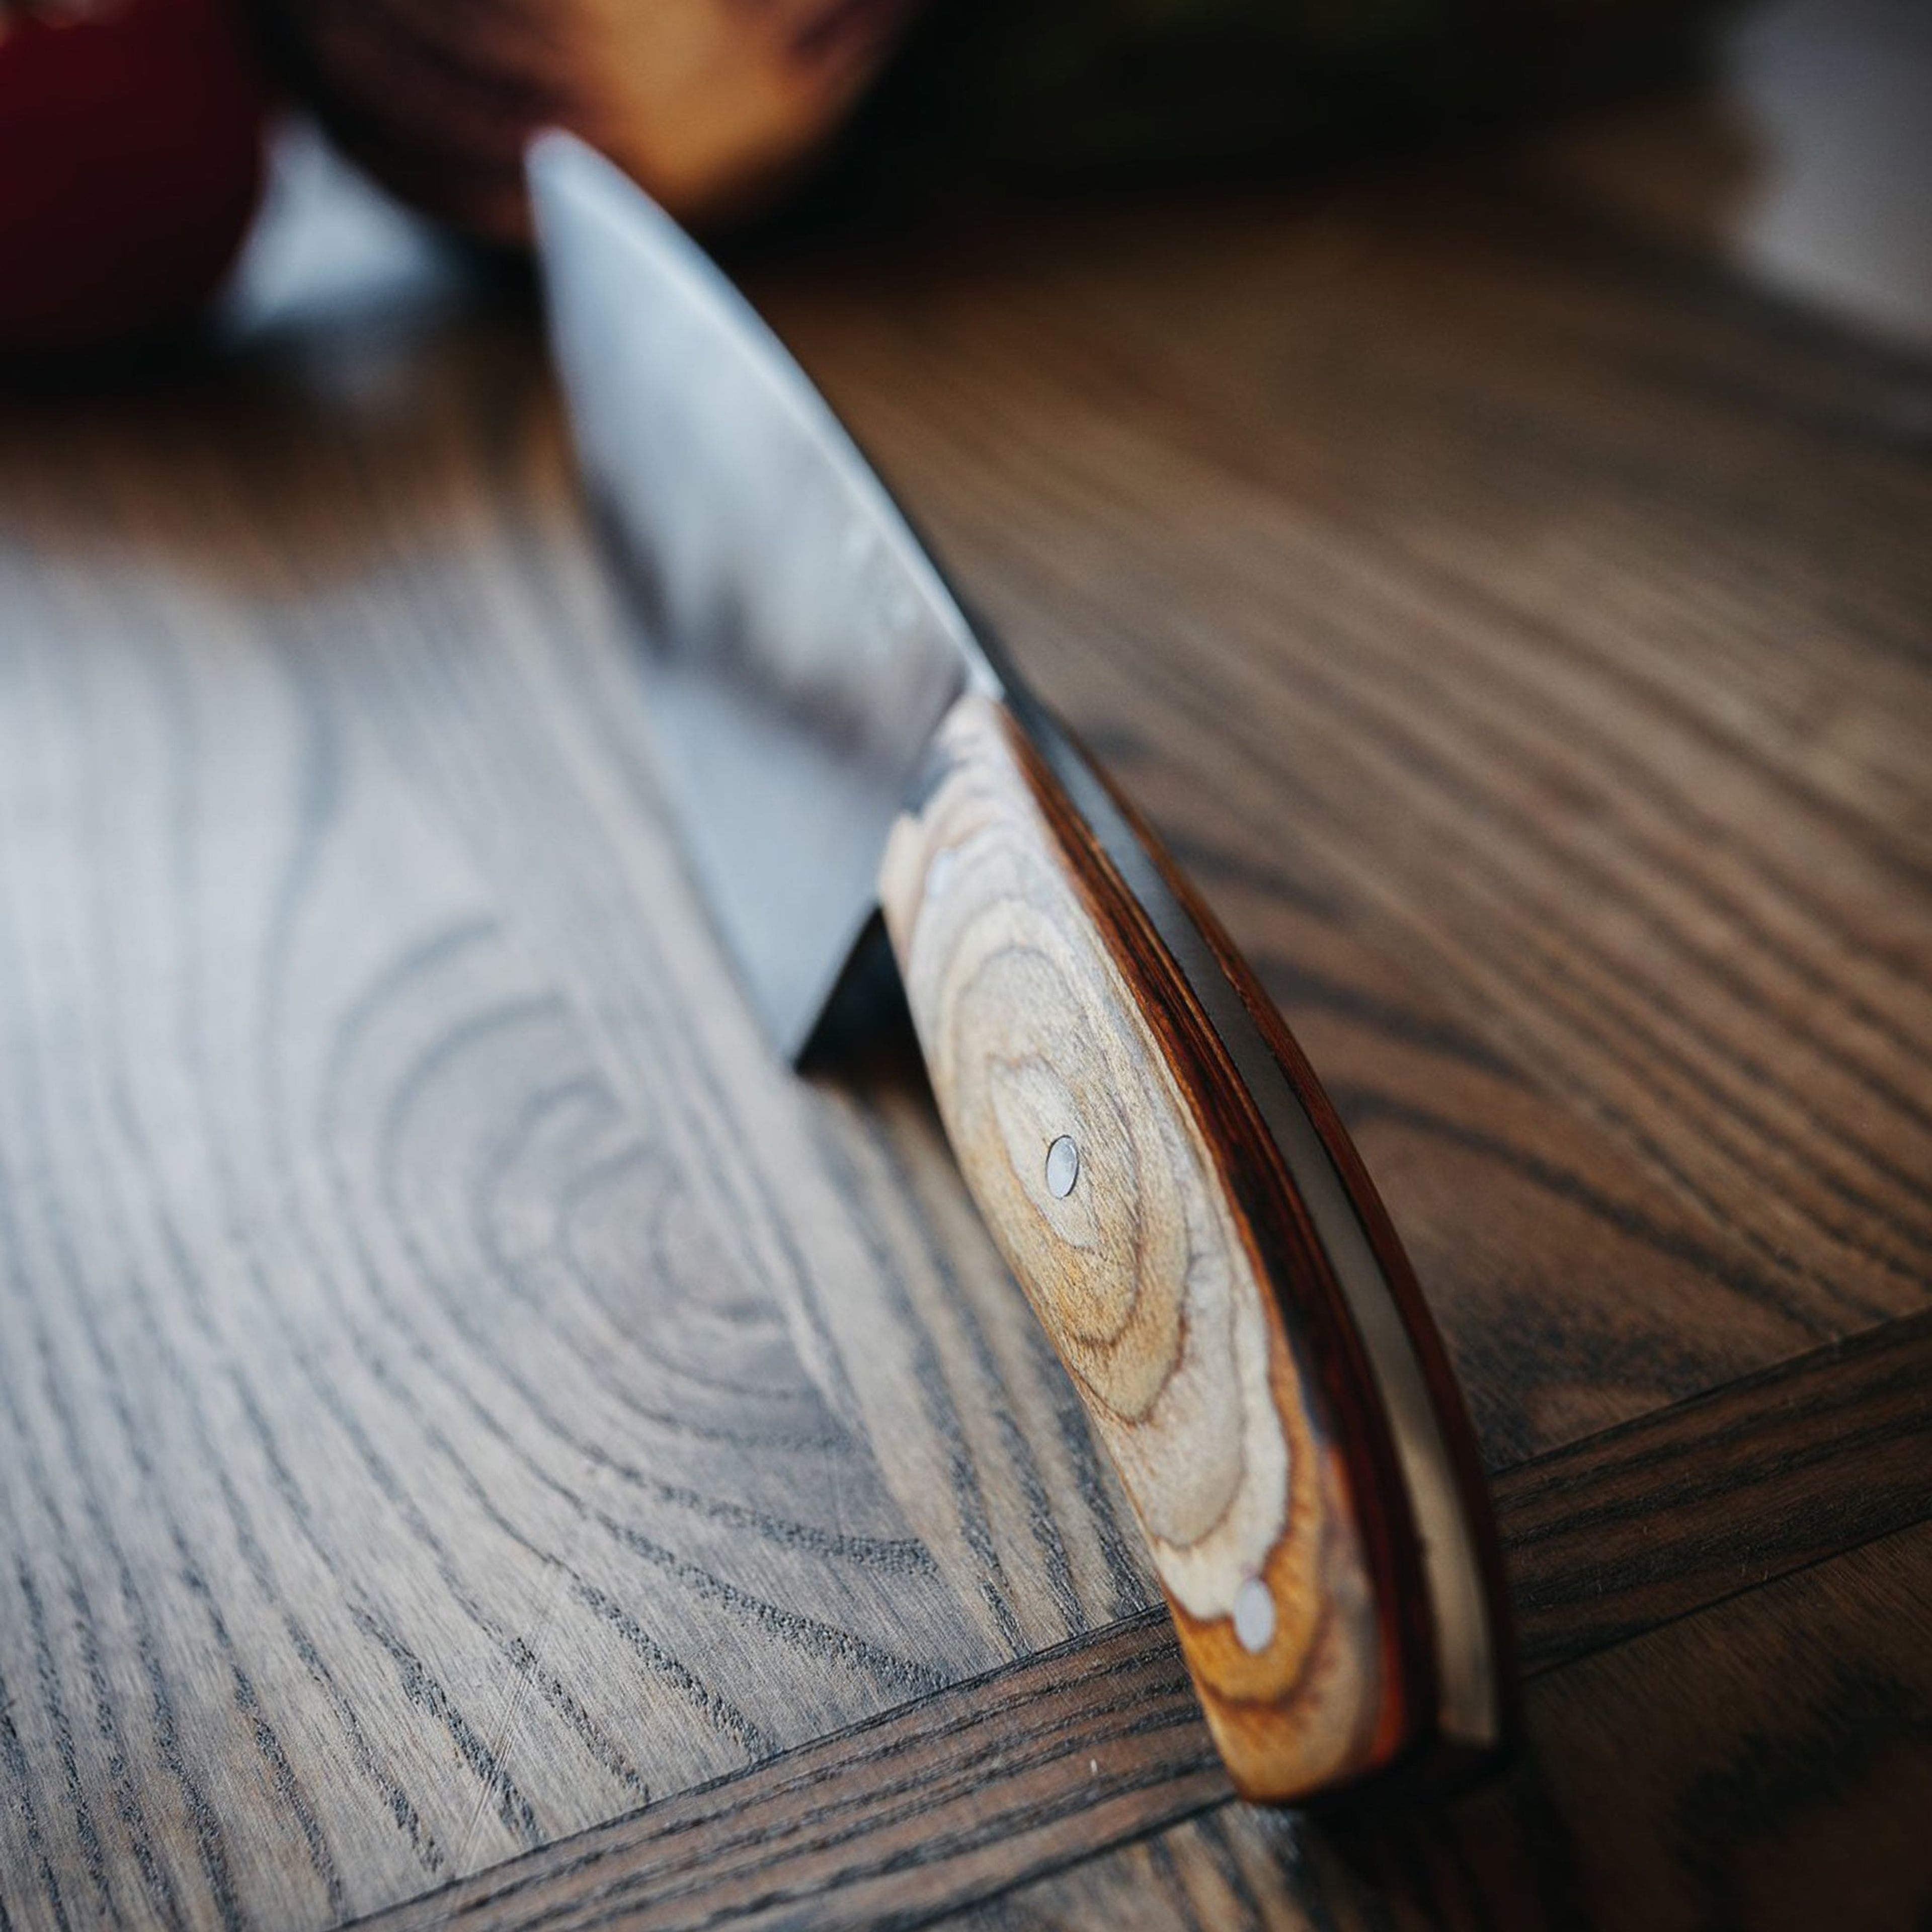 Ouray Chef's Knife